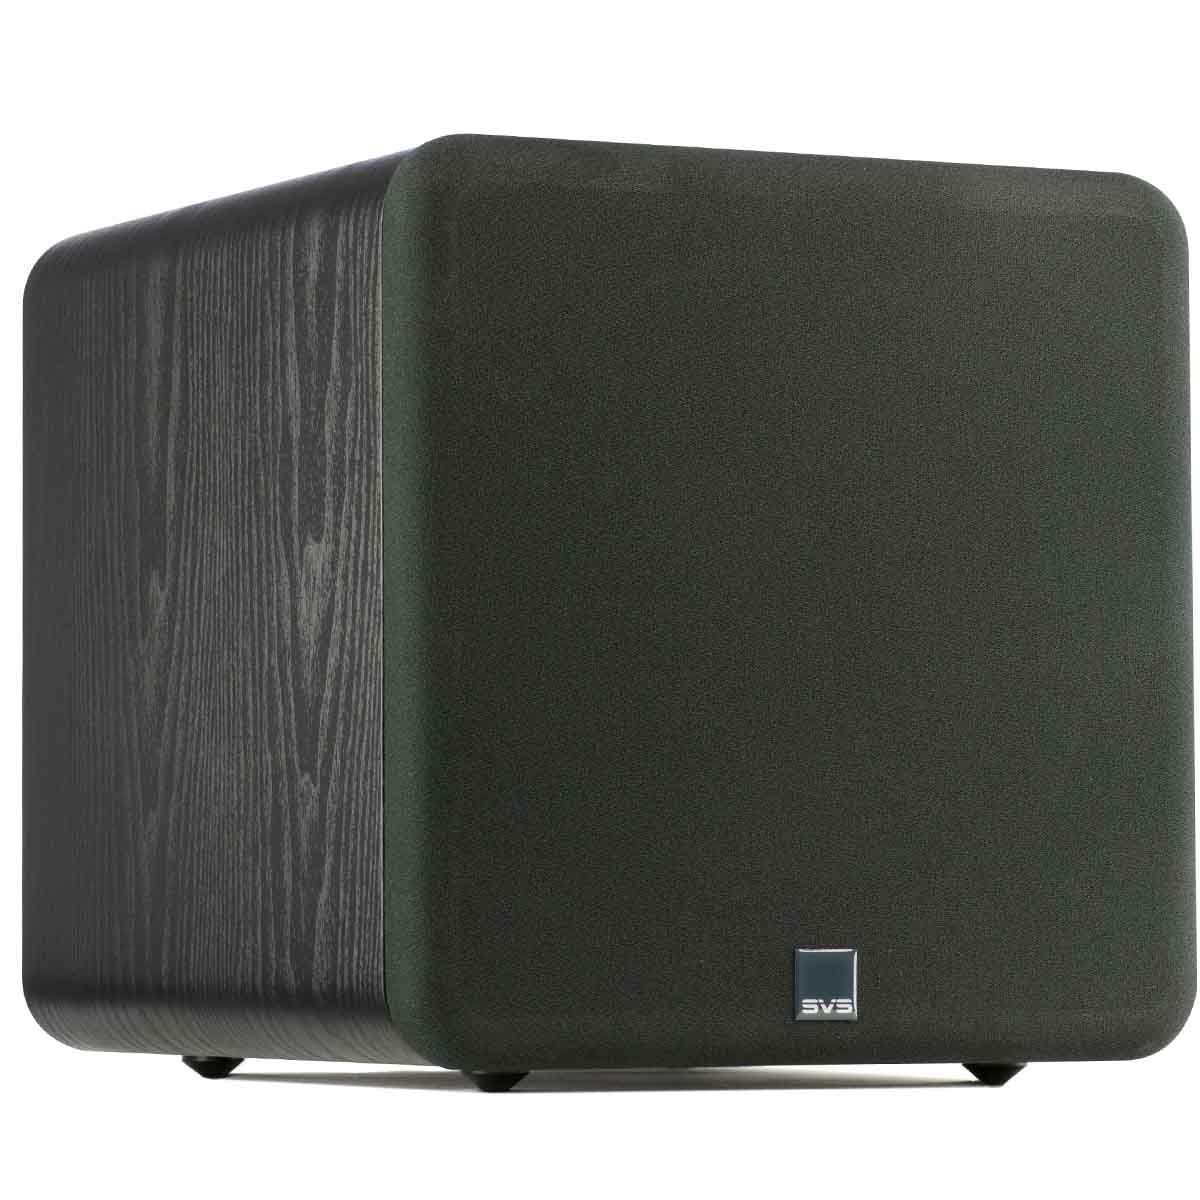 SVS SB-1000 12" Ultra Compact Sealed Subwoofer - angled front view with grille